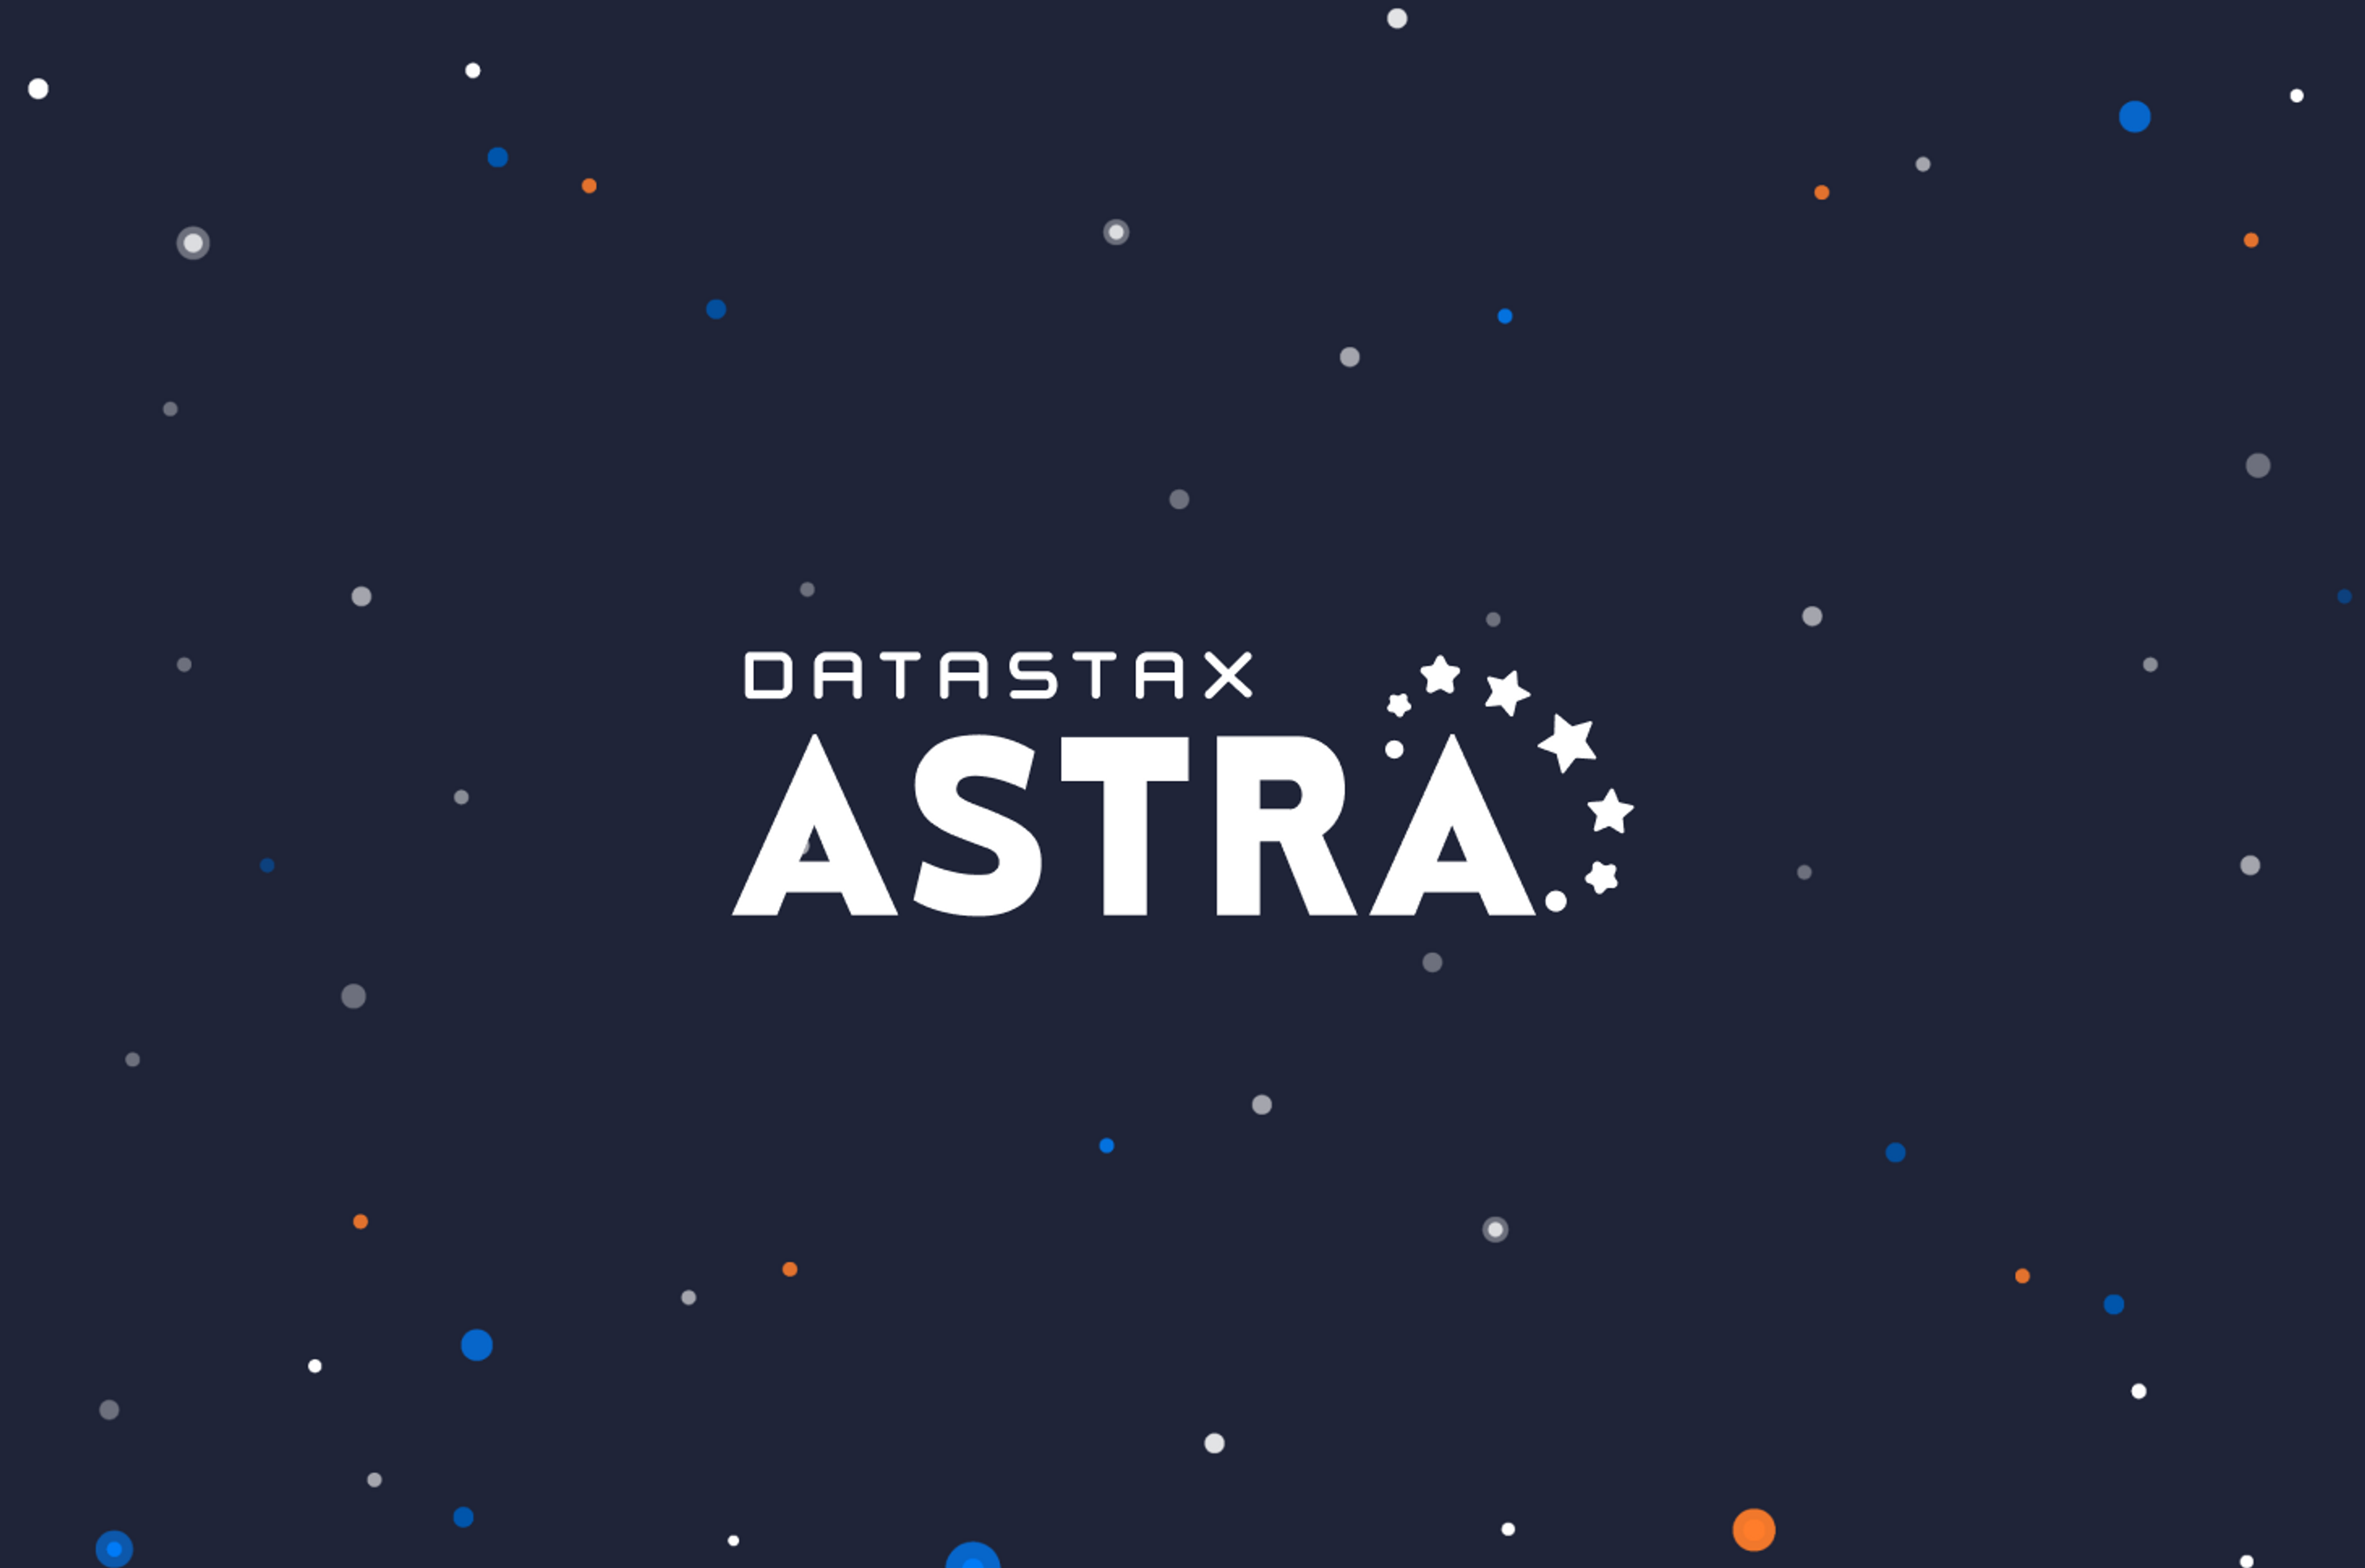 Welcome to DataStax Astra